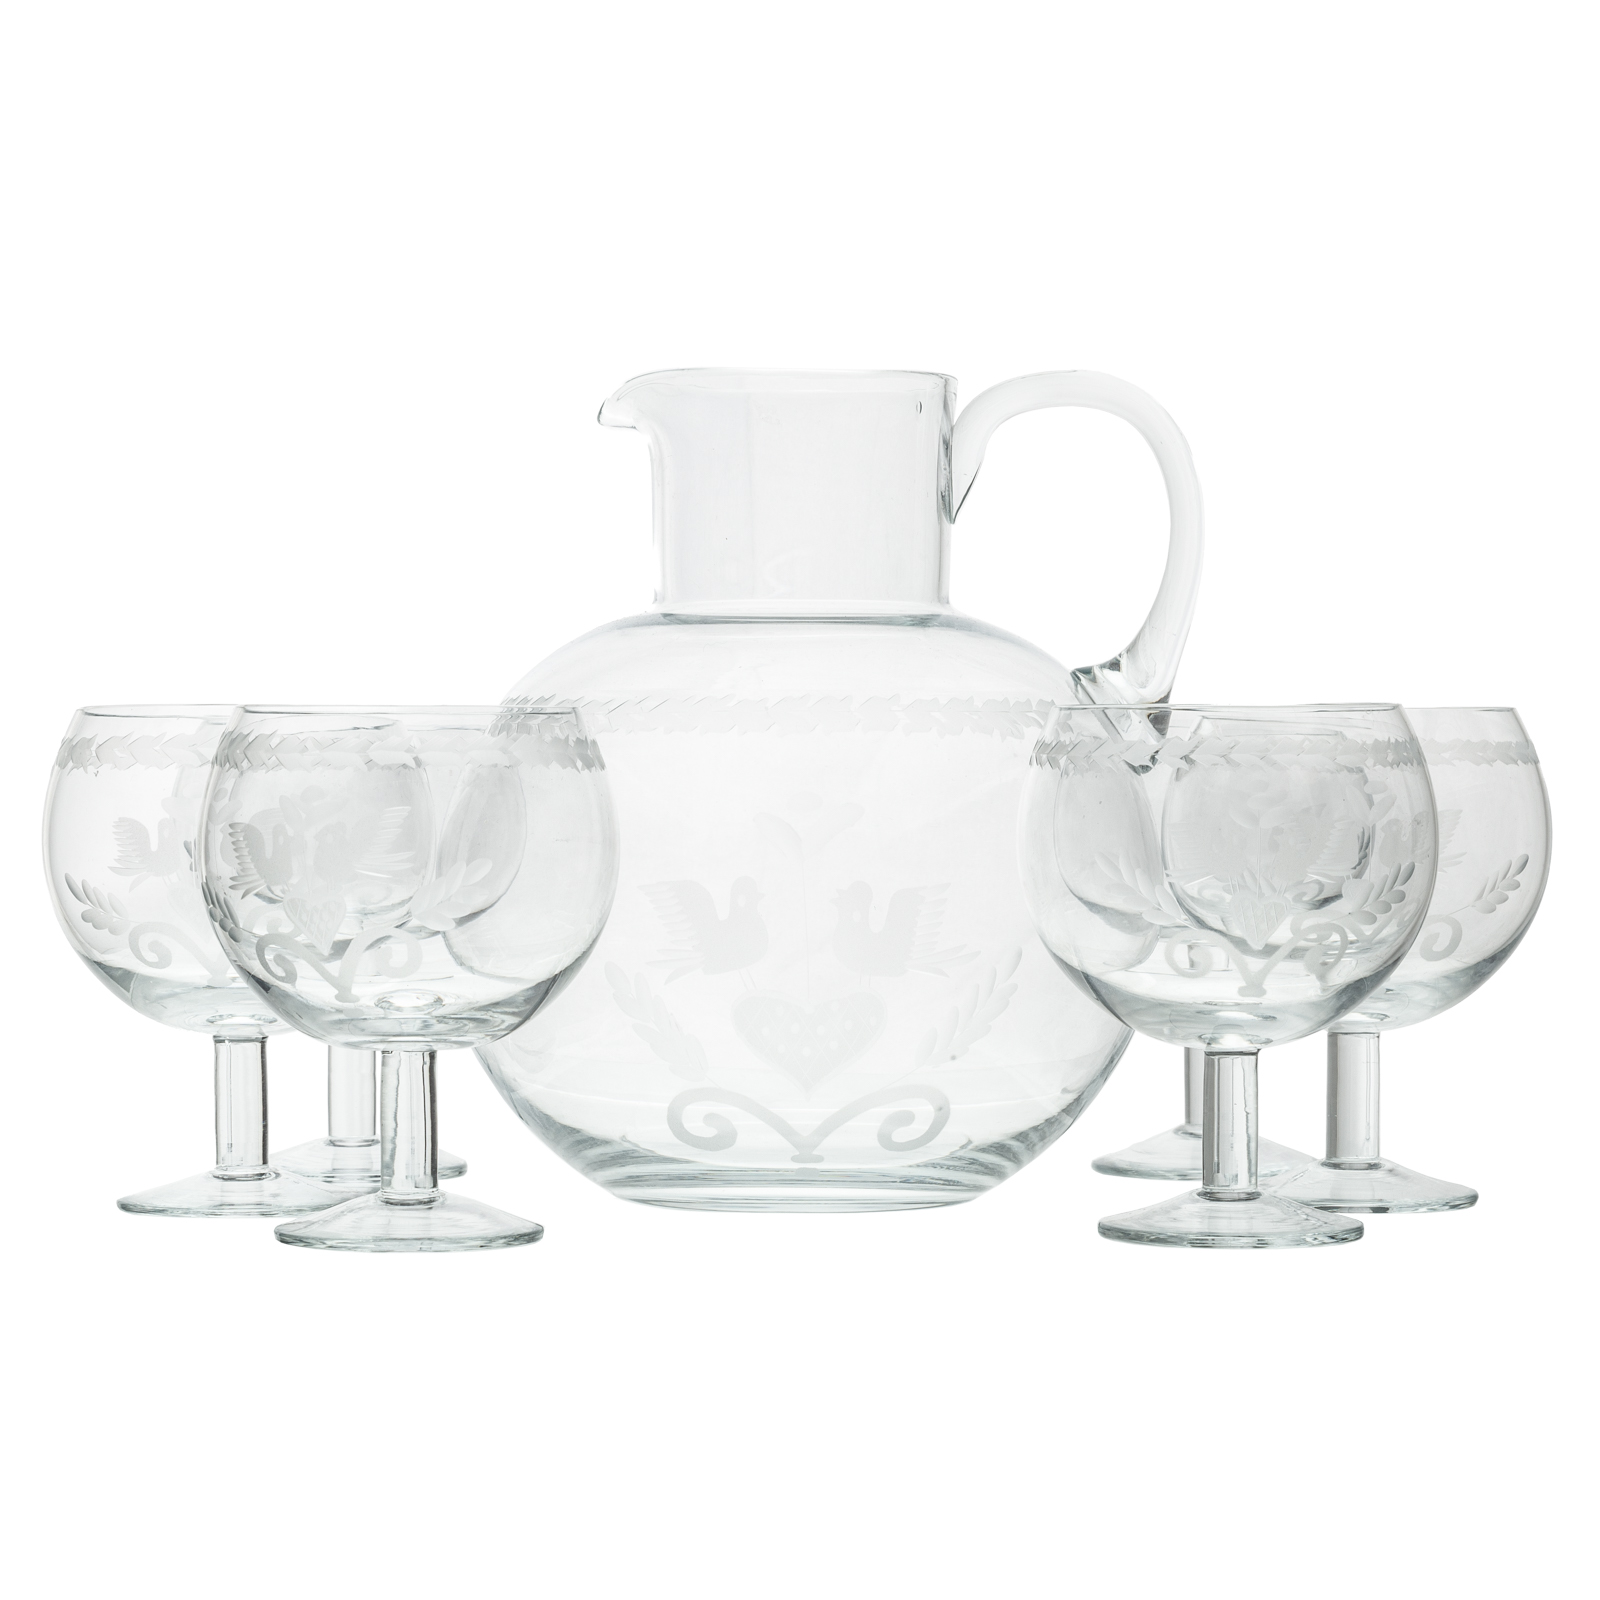 TIFFANY ETCHED GLASS SEVEN-PIECE